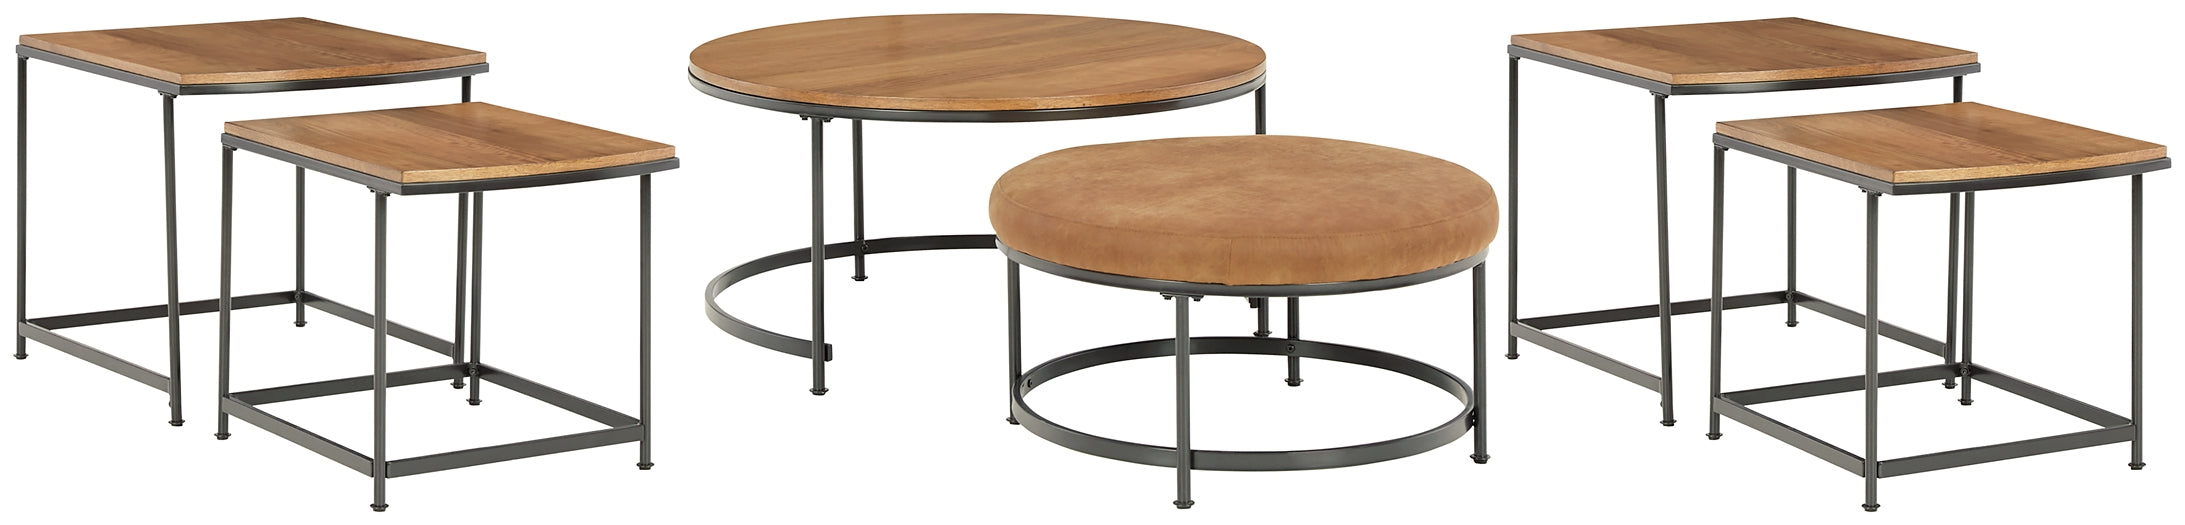 Drezmoore Coffee Table with 2 End Tables